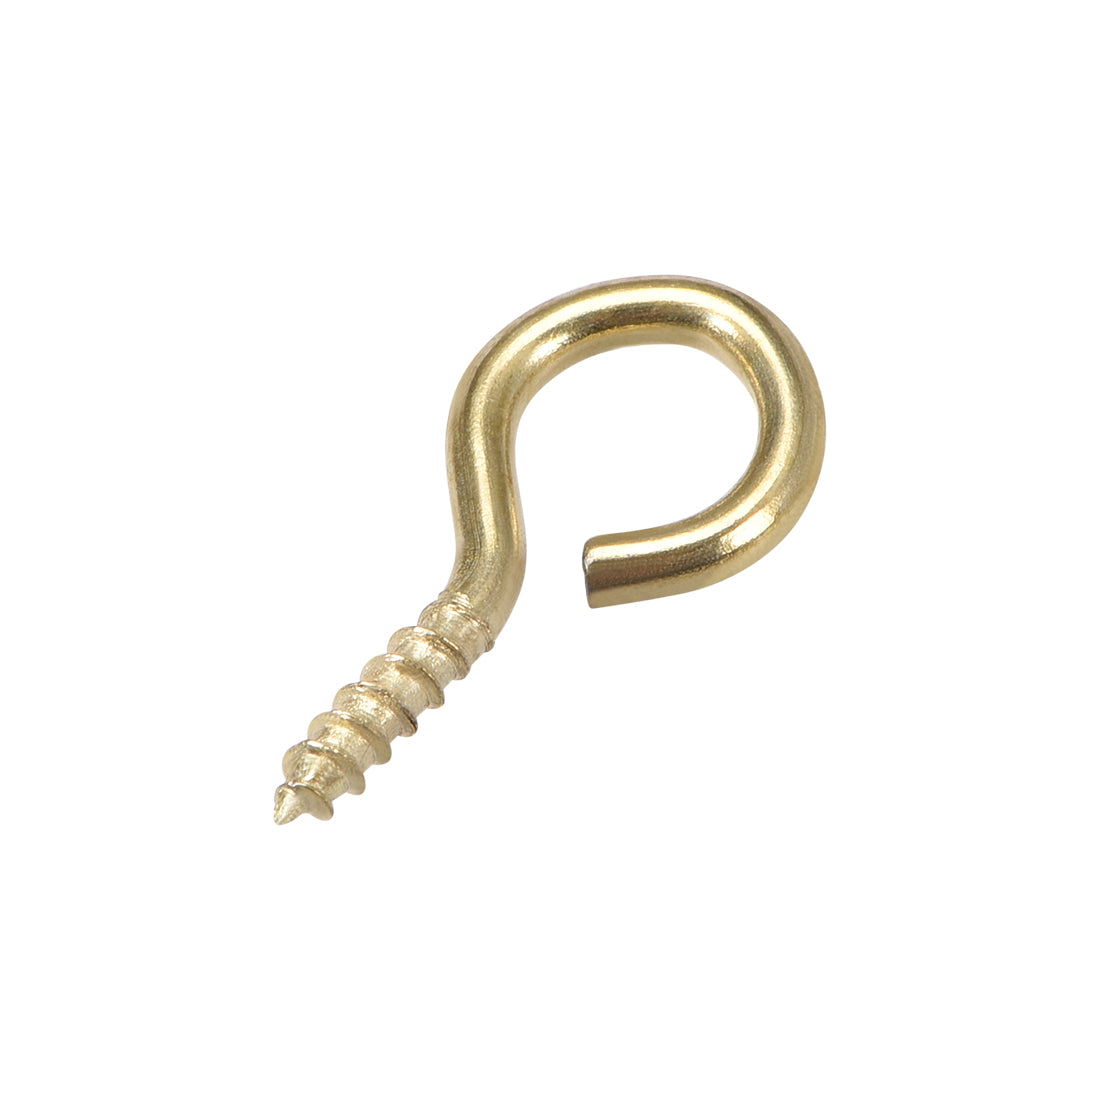 uxcell Uxcell 0.7" Small Screw Eye Hooks Self Tapping Screws Carbon Steel Screw-in Hanger Eye-Shape Ring Hooks Gold 100pcs